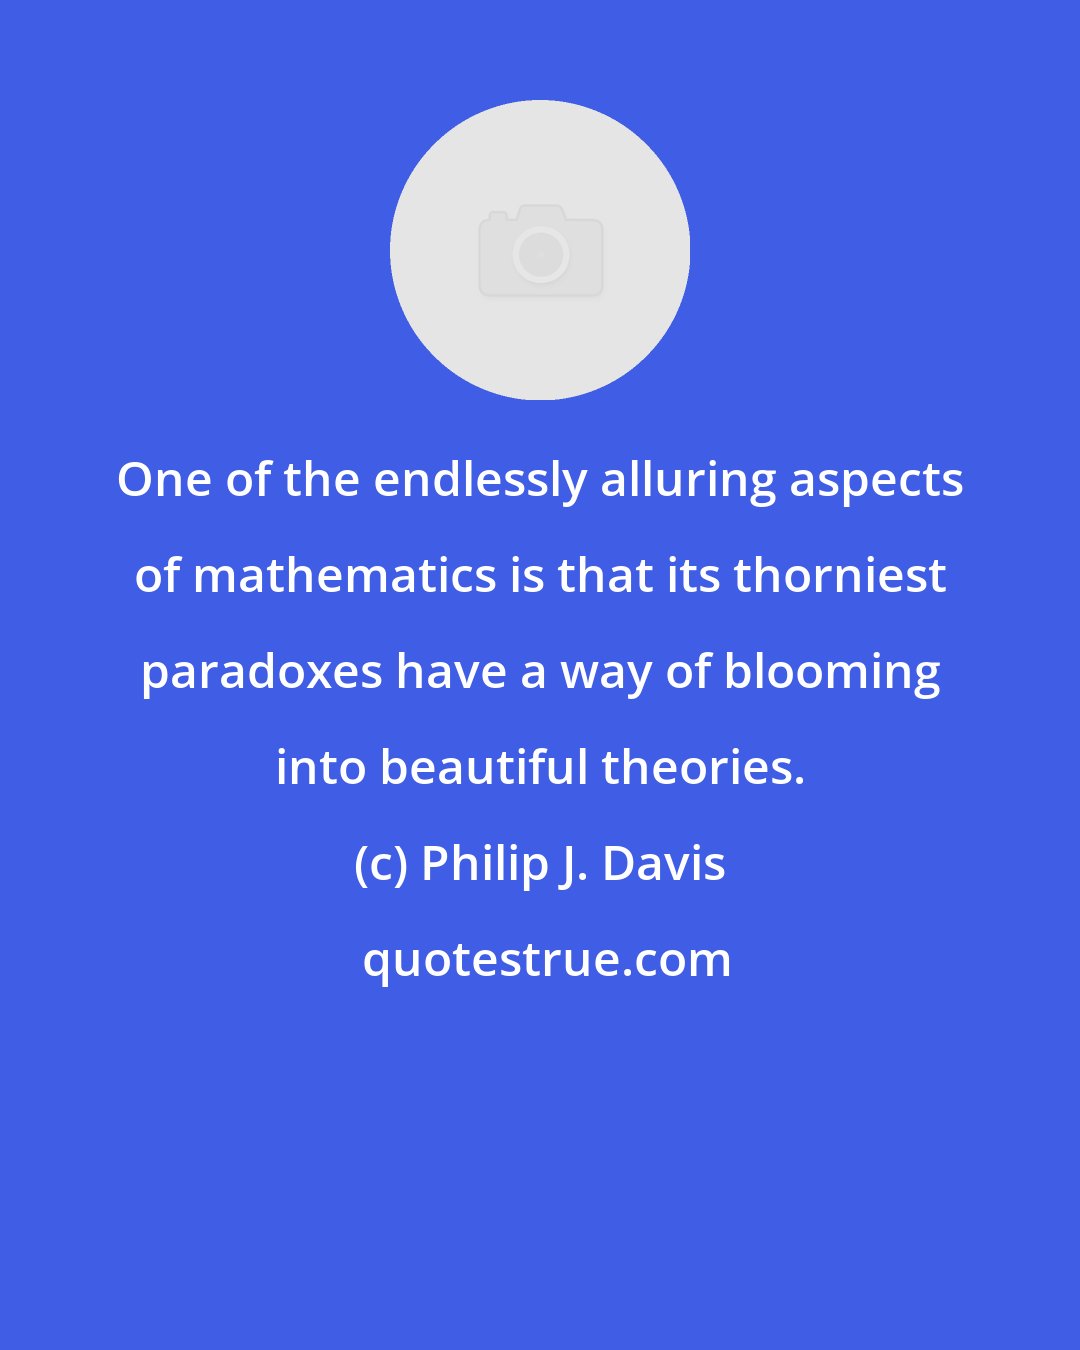 Philip J. Davis: One of the endlessly alluring aspects of mathematics is that its thorniest paradoxes have a way of blooming into beautiful theories.